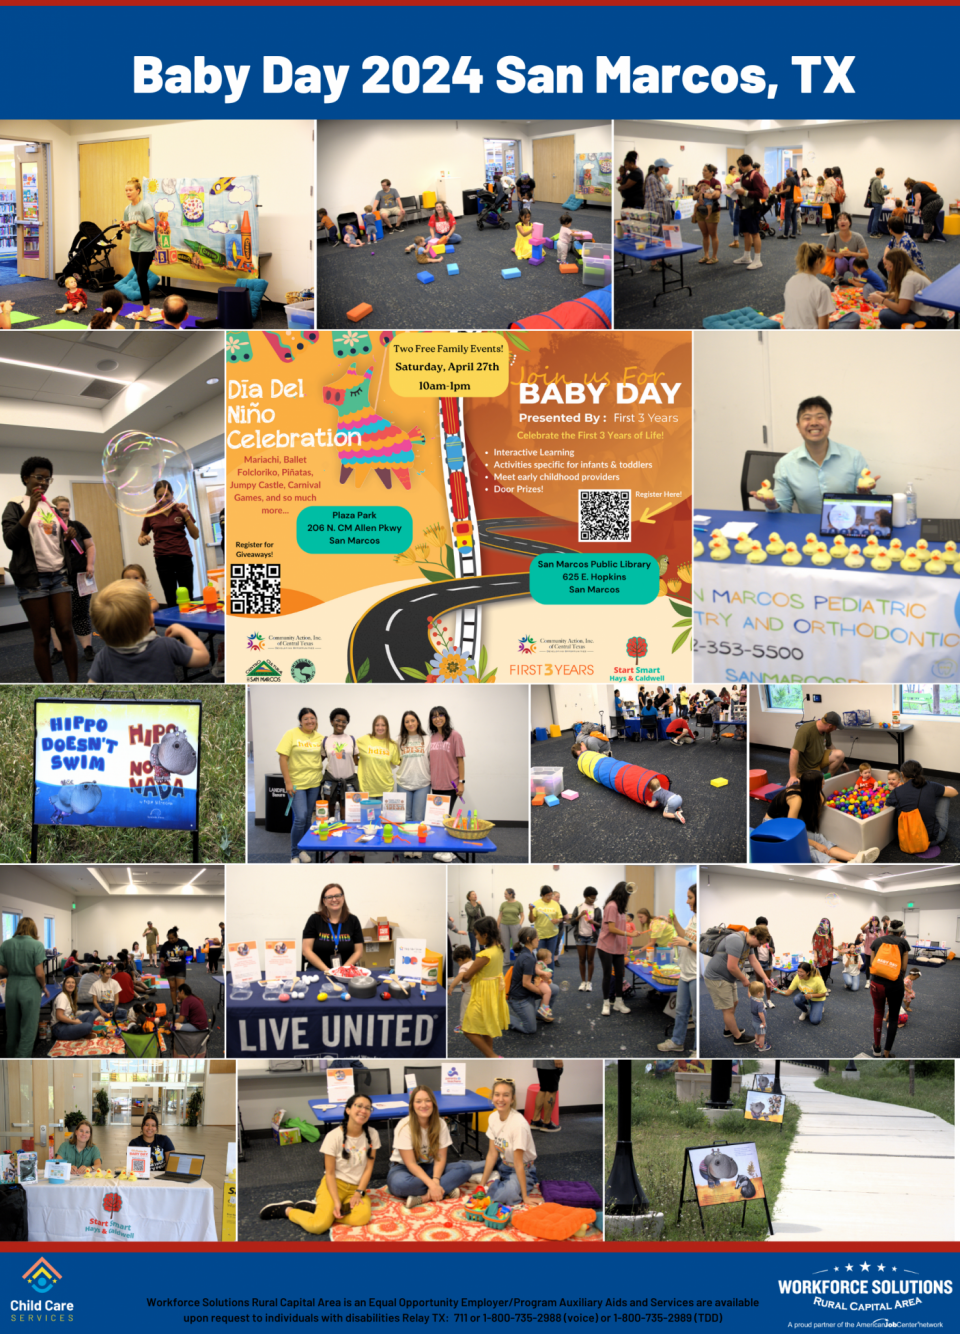 Celebrating Baby Day Event in San Marcos